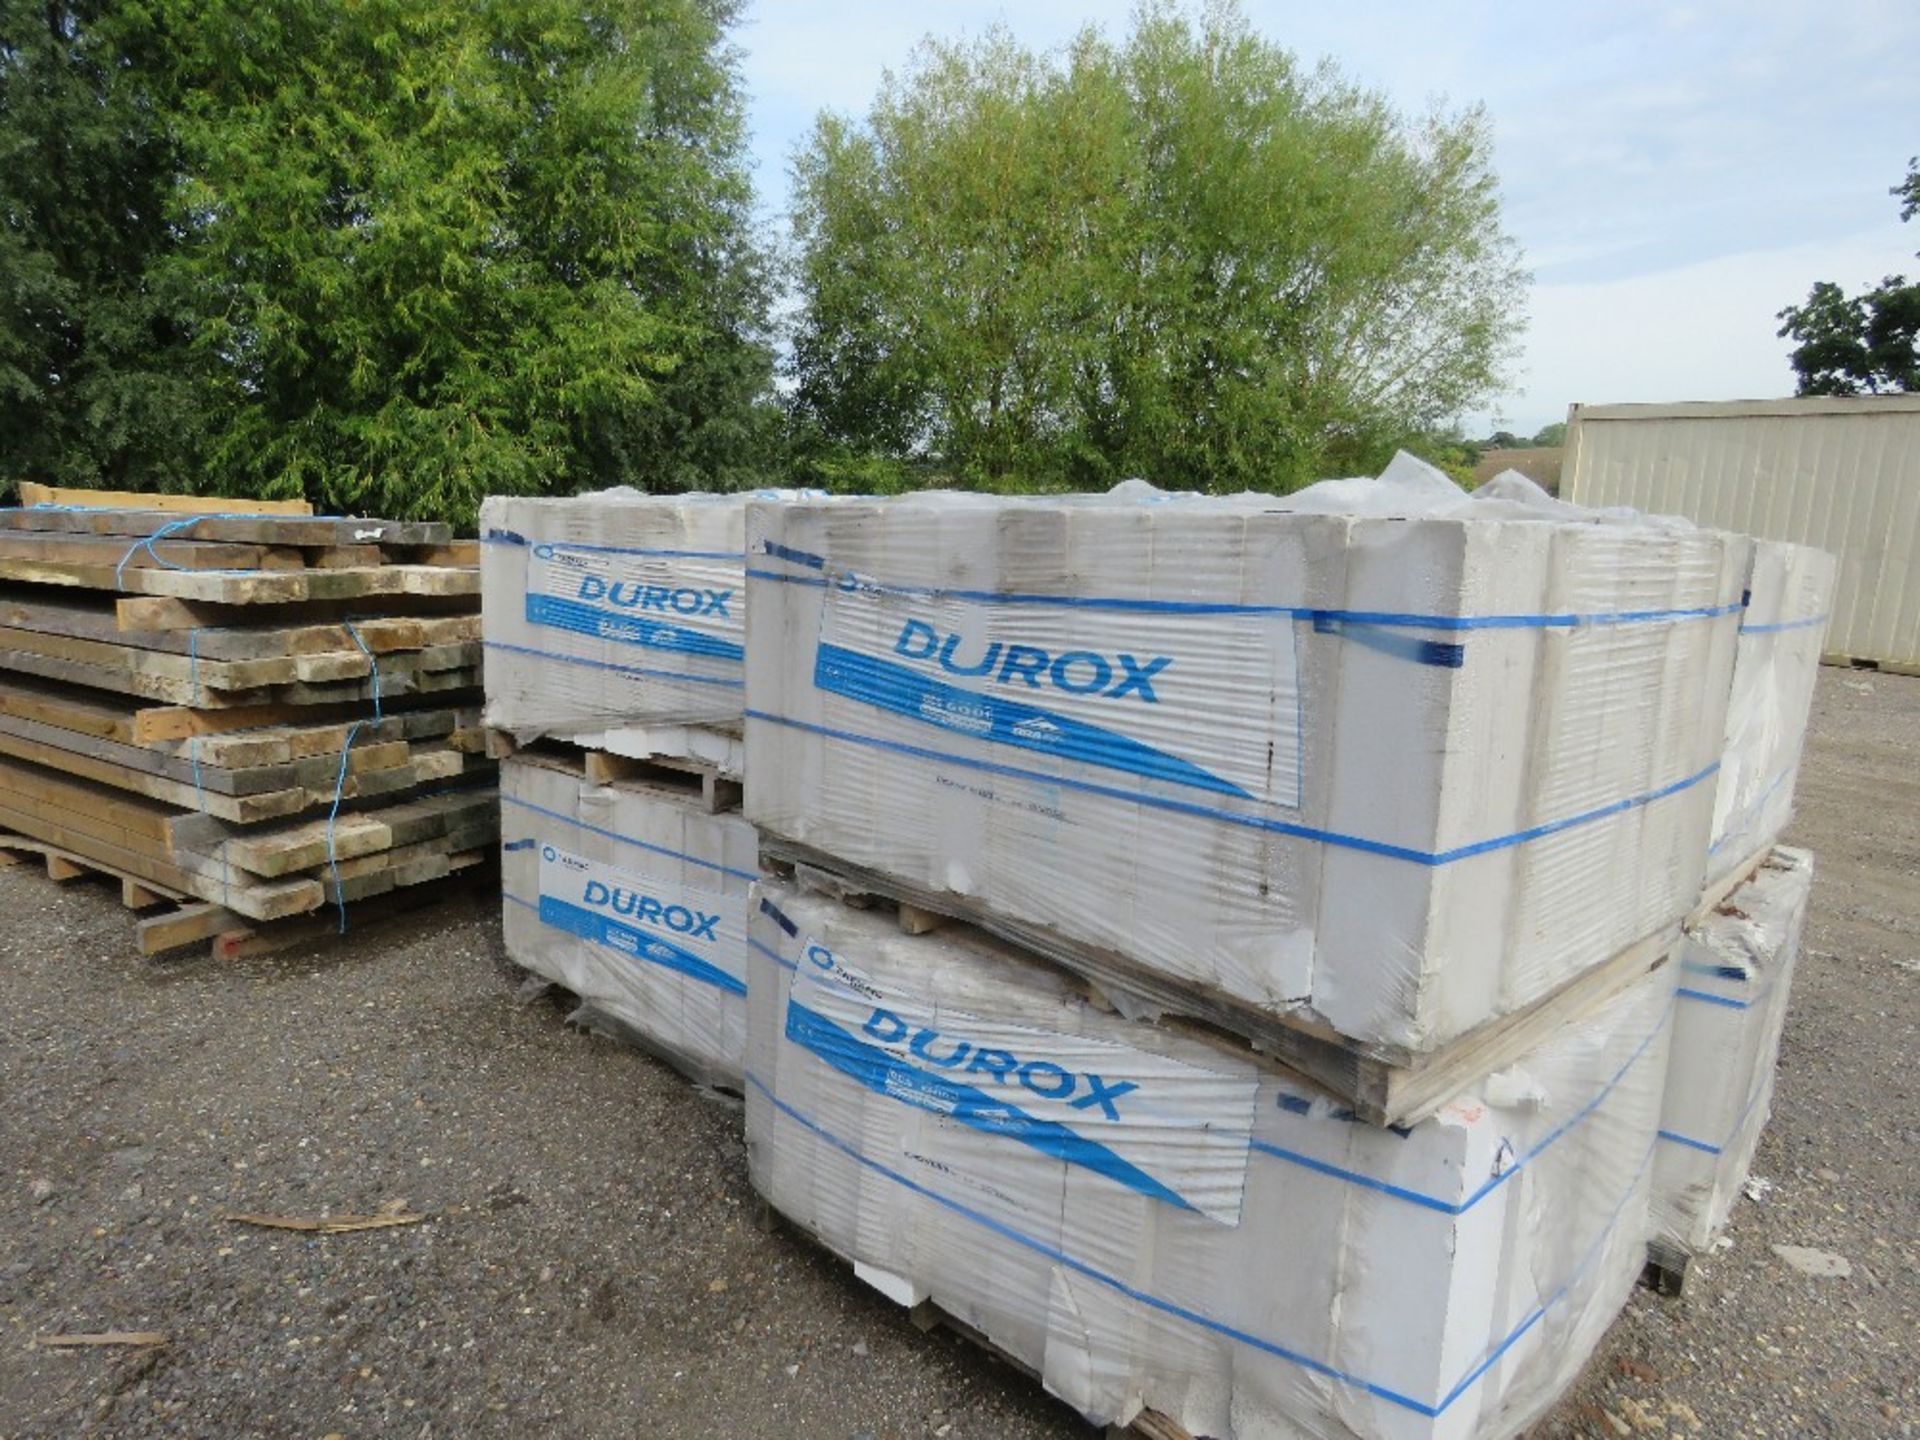 8 X PACKS OF DUROX LIGHTWEIGHT BUILDING BLOCKS 60 X 14 X 20CM APPROX, 50NO PER PACK, 100NO IN TOTAL - Image 3 of 4